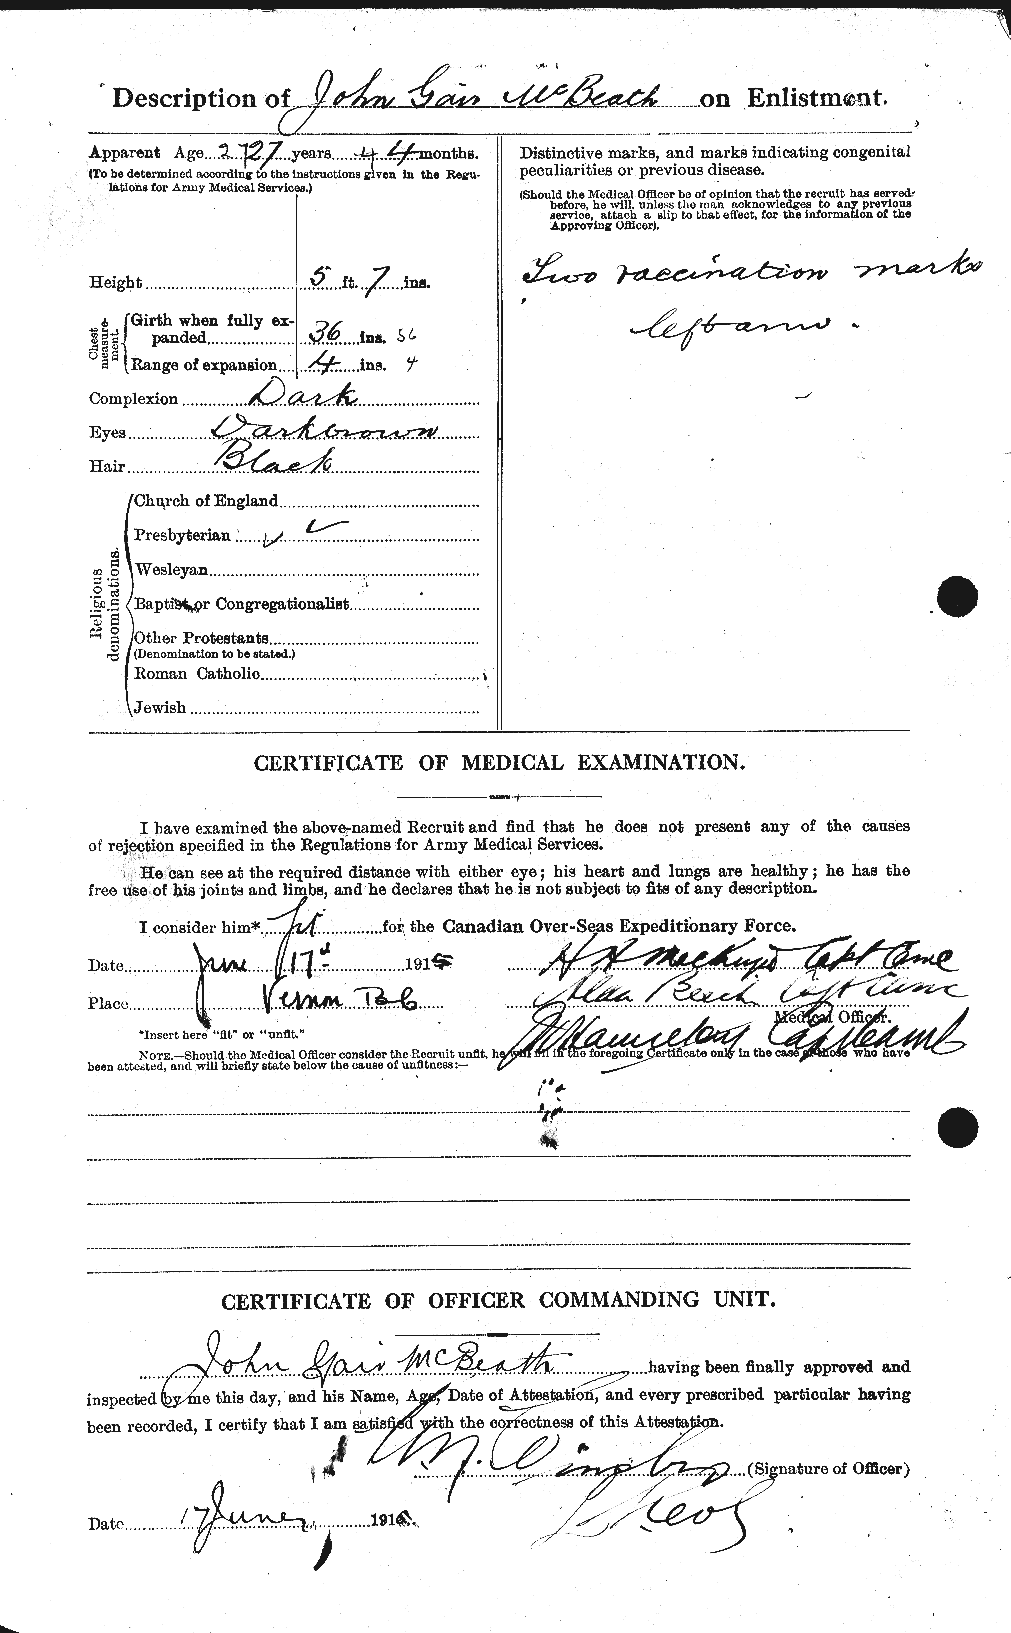 Personnel Records of the First World War - CEF 132380b